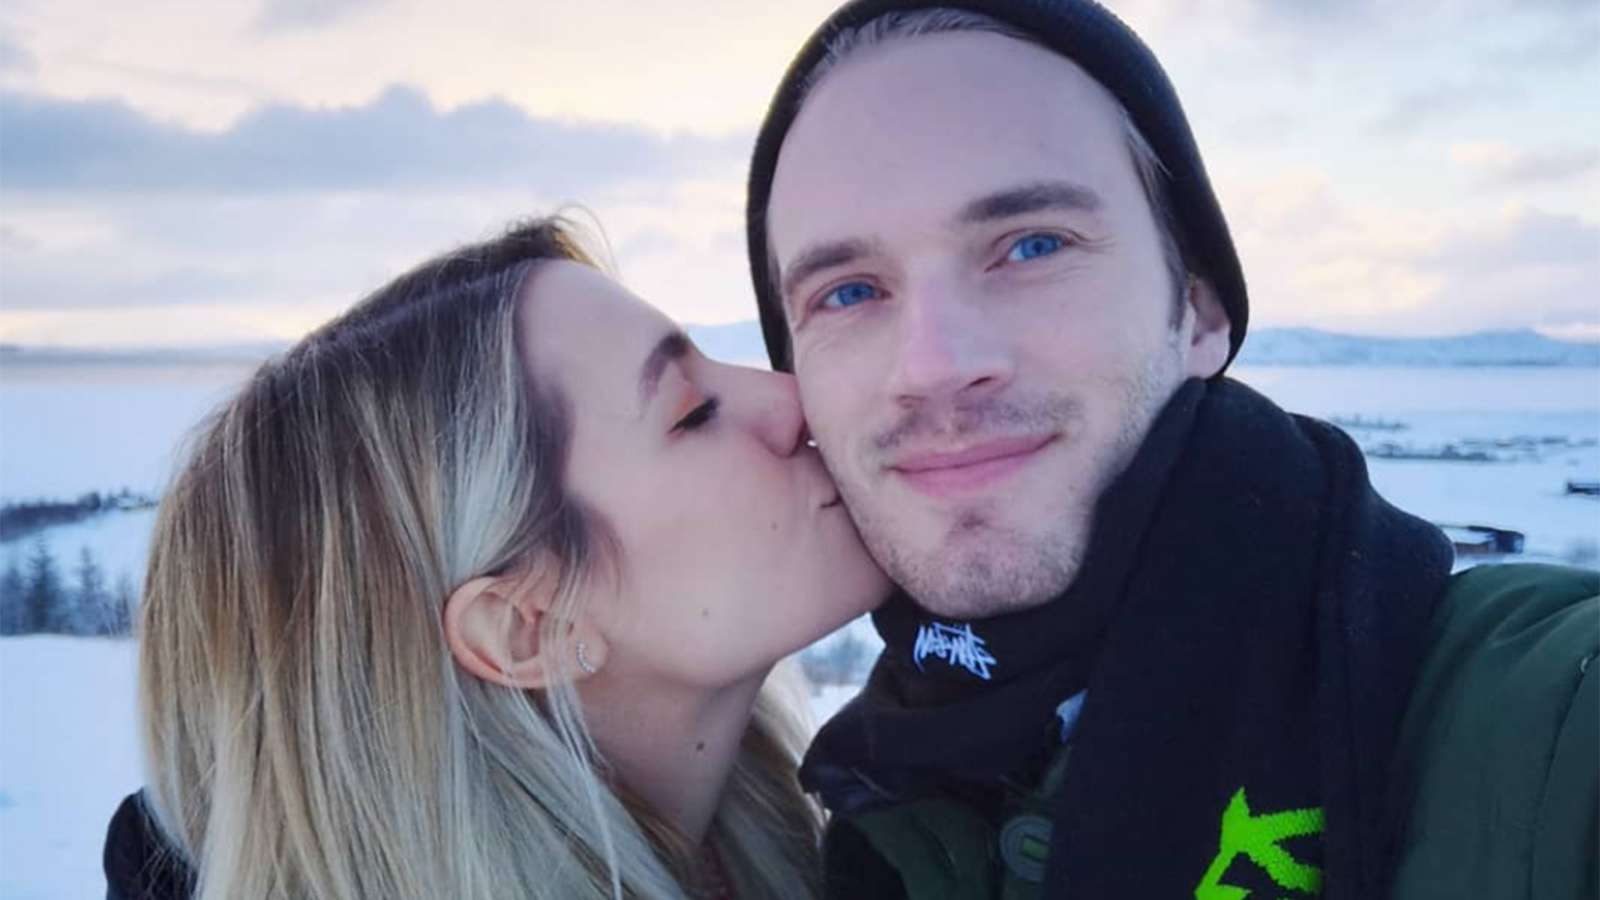 Instagram upload of YouTuber PewDiePie and his wife Marzia.